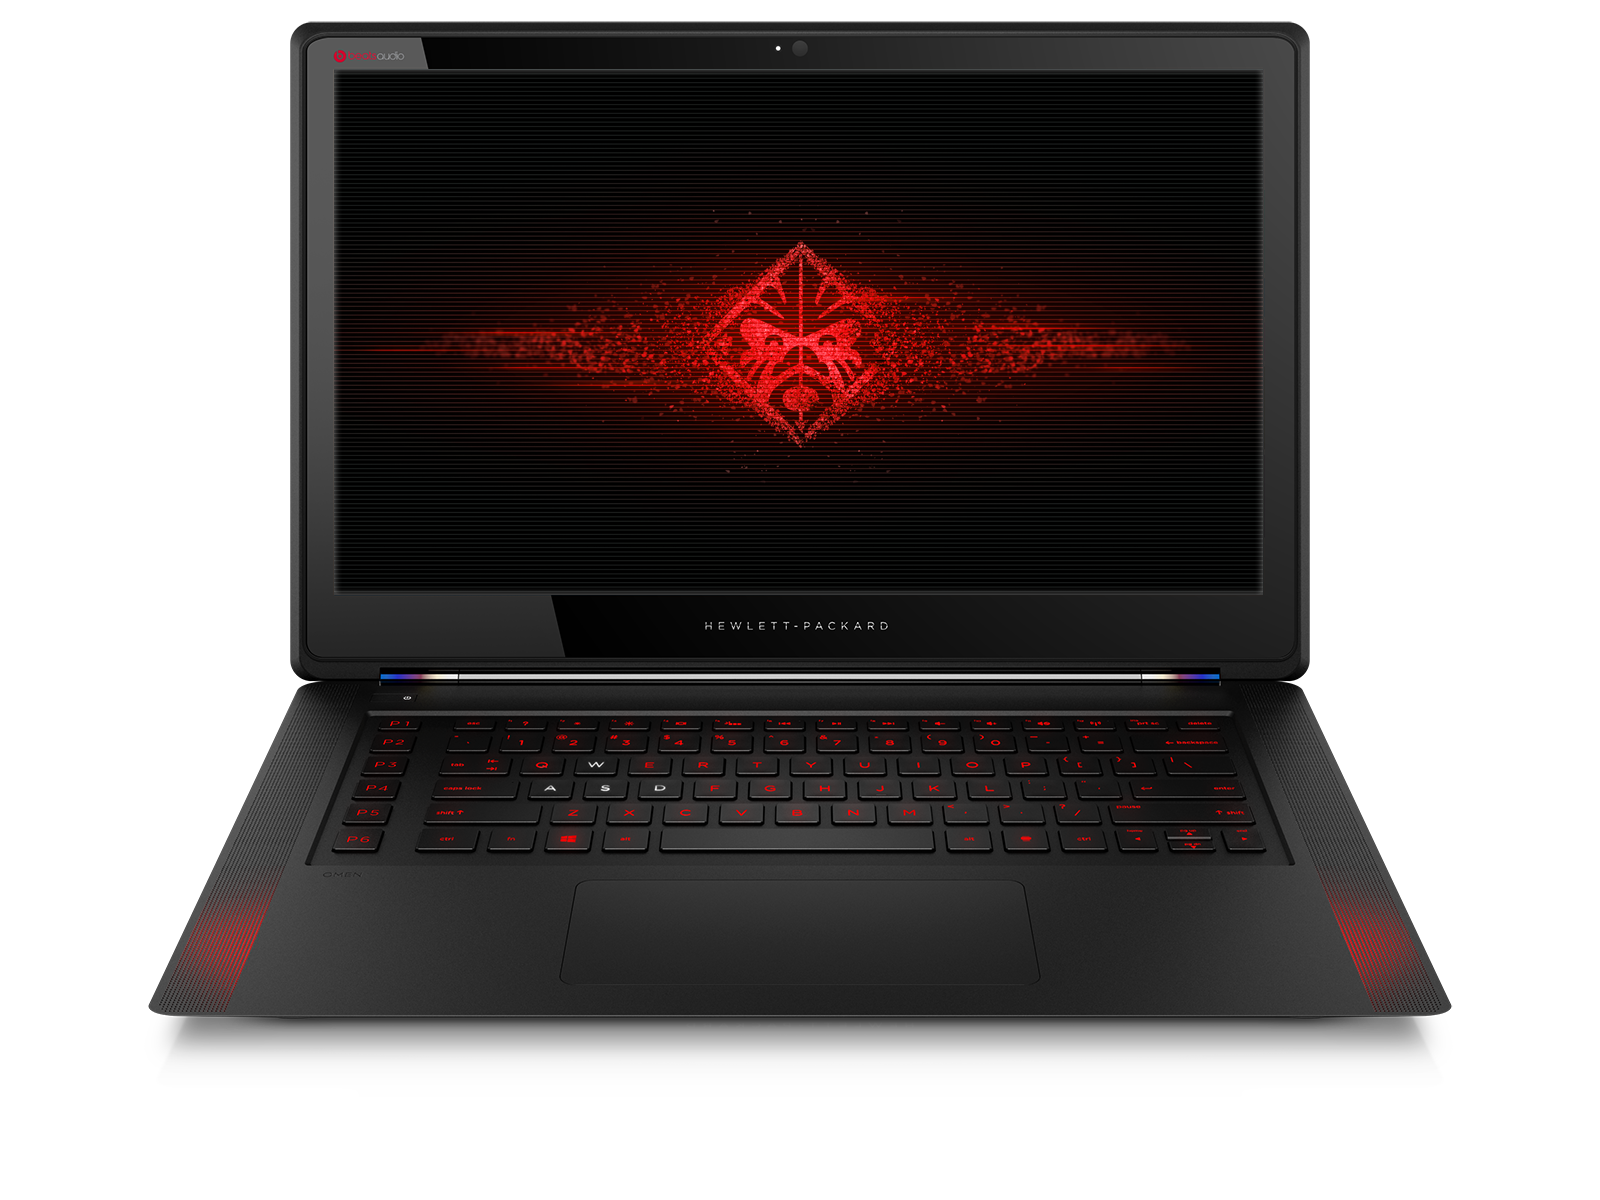 HP Omen gaming laptops with core i7 and Nvidia GTX 860M start at 1499